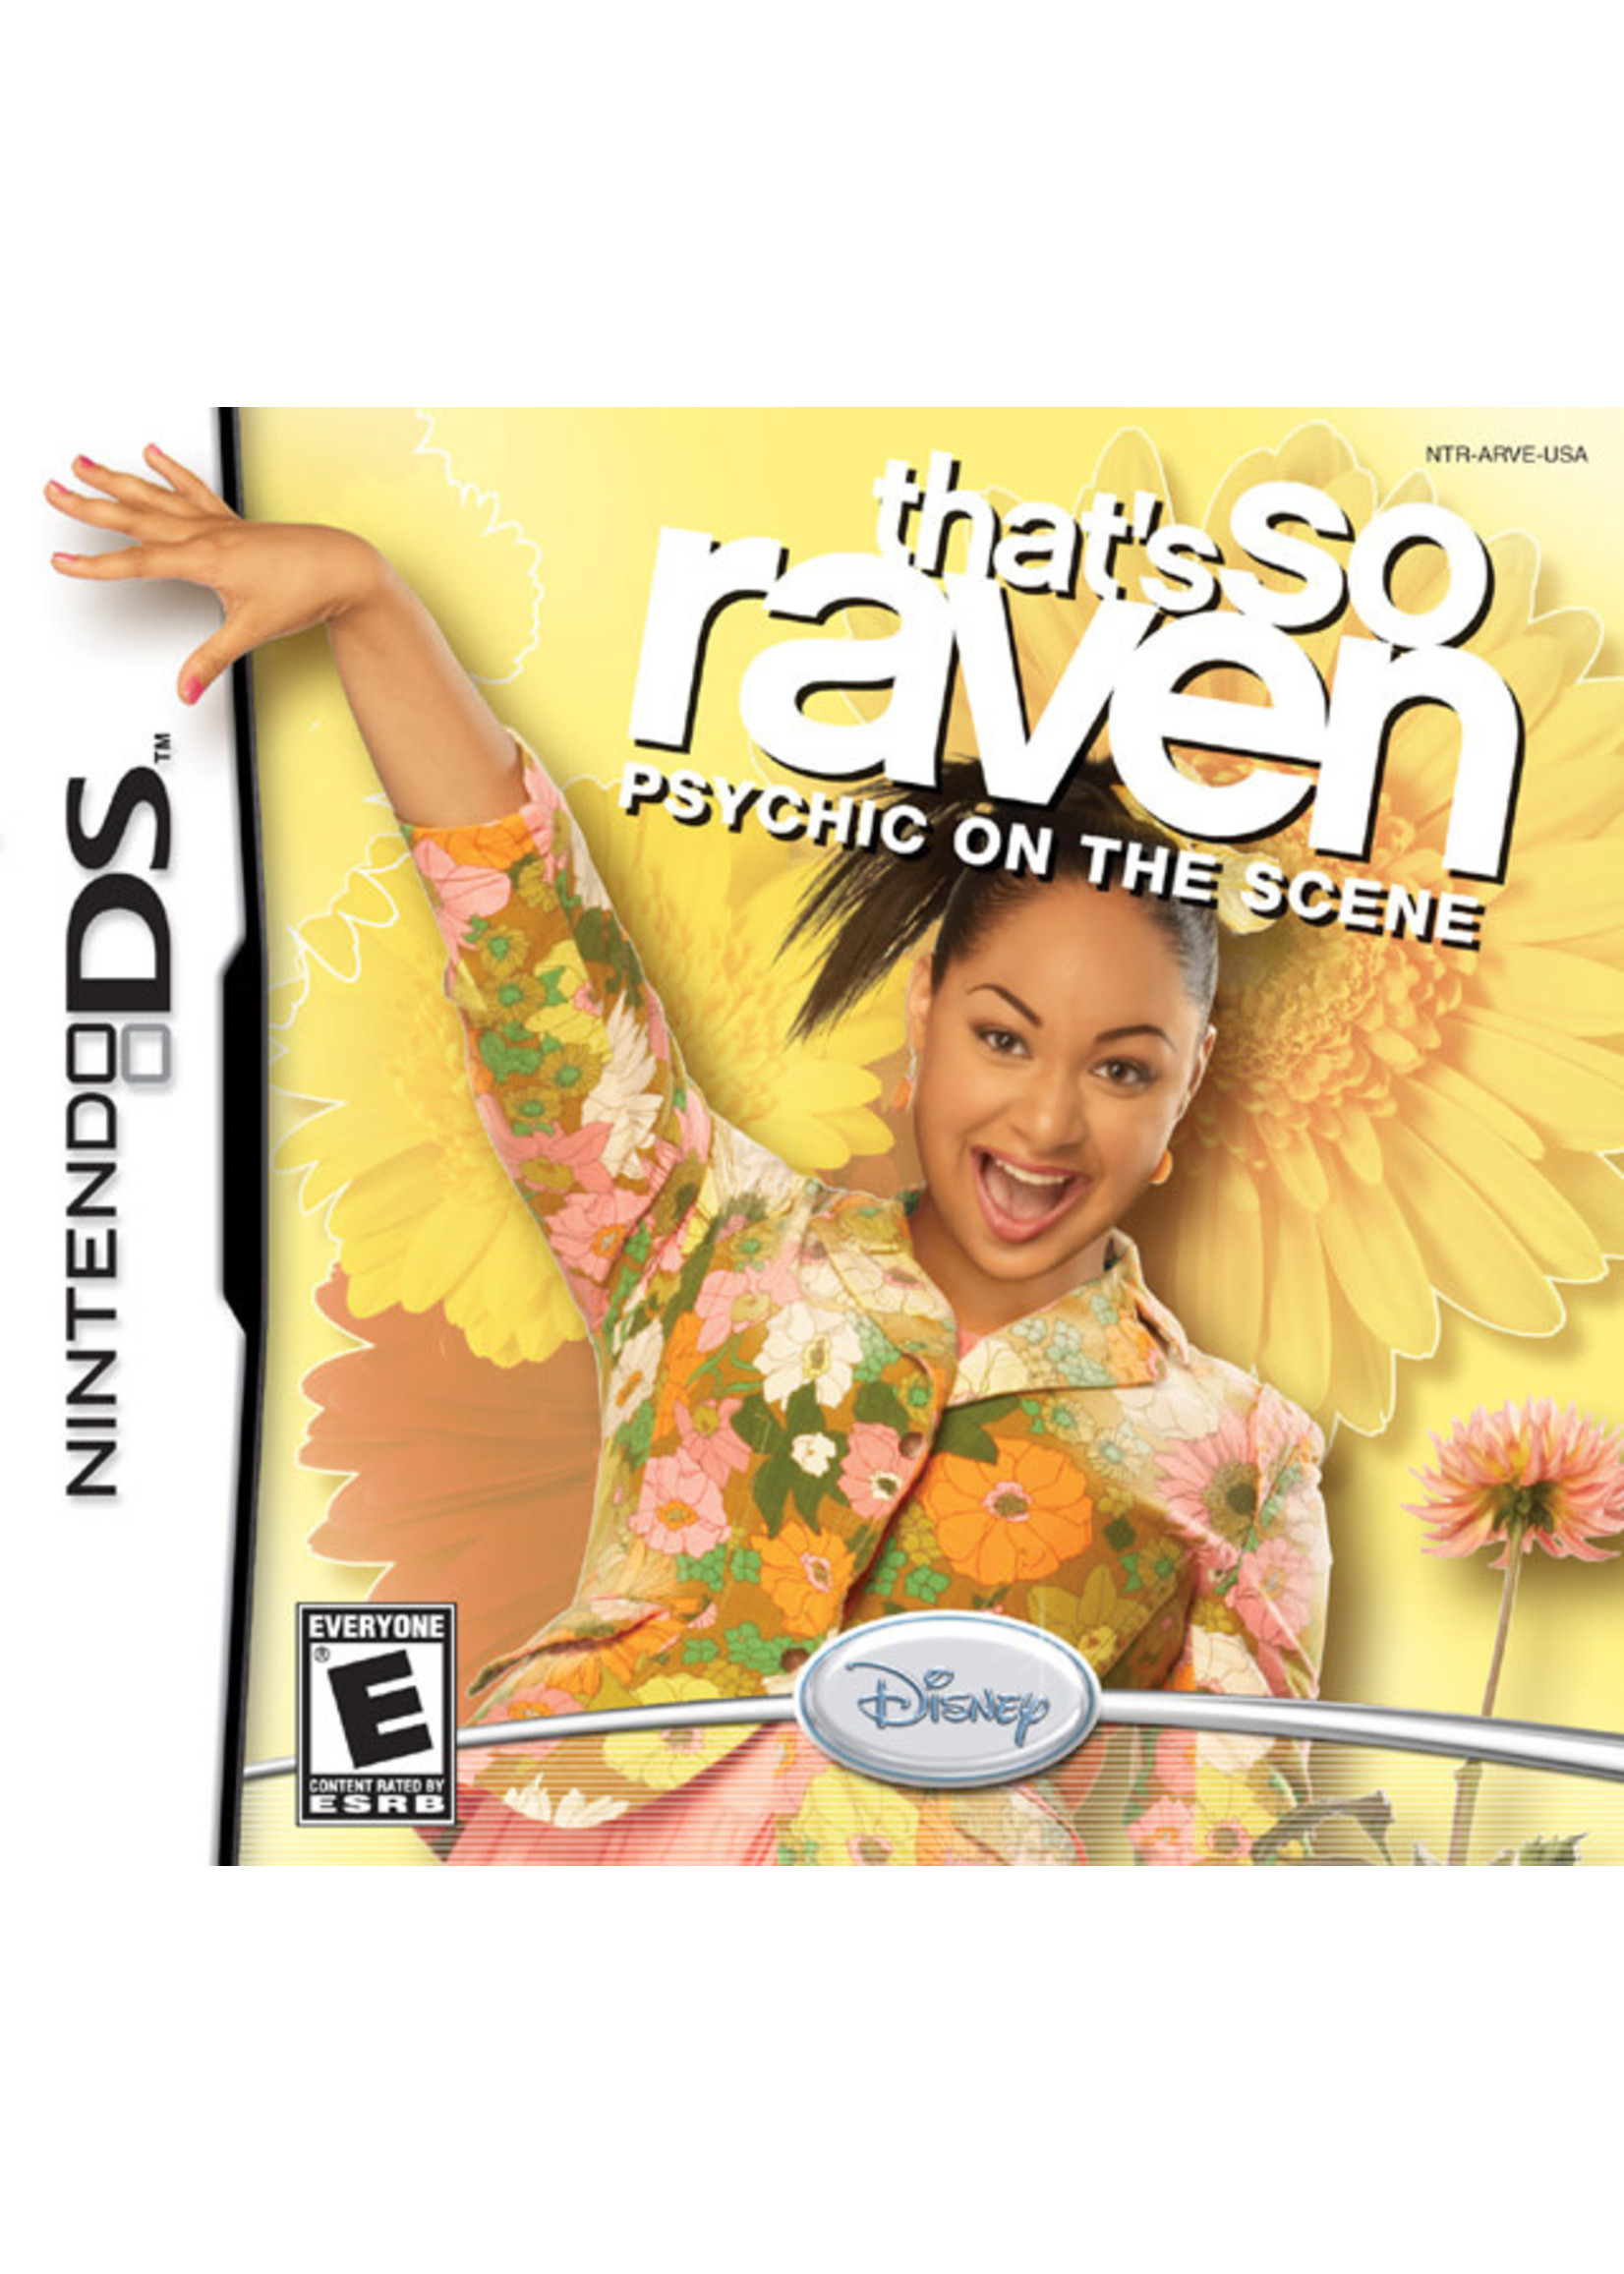 Nintendo DS That's So Raven Psychic on Scene - Cart Only